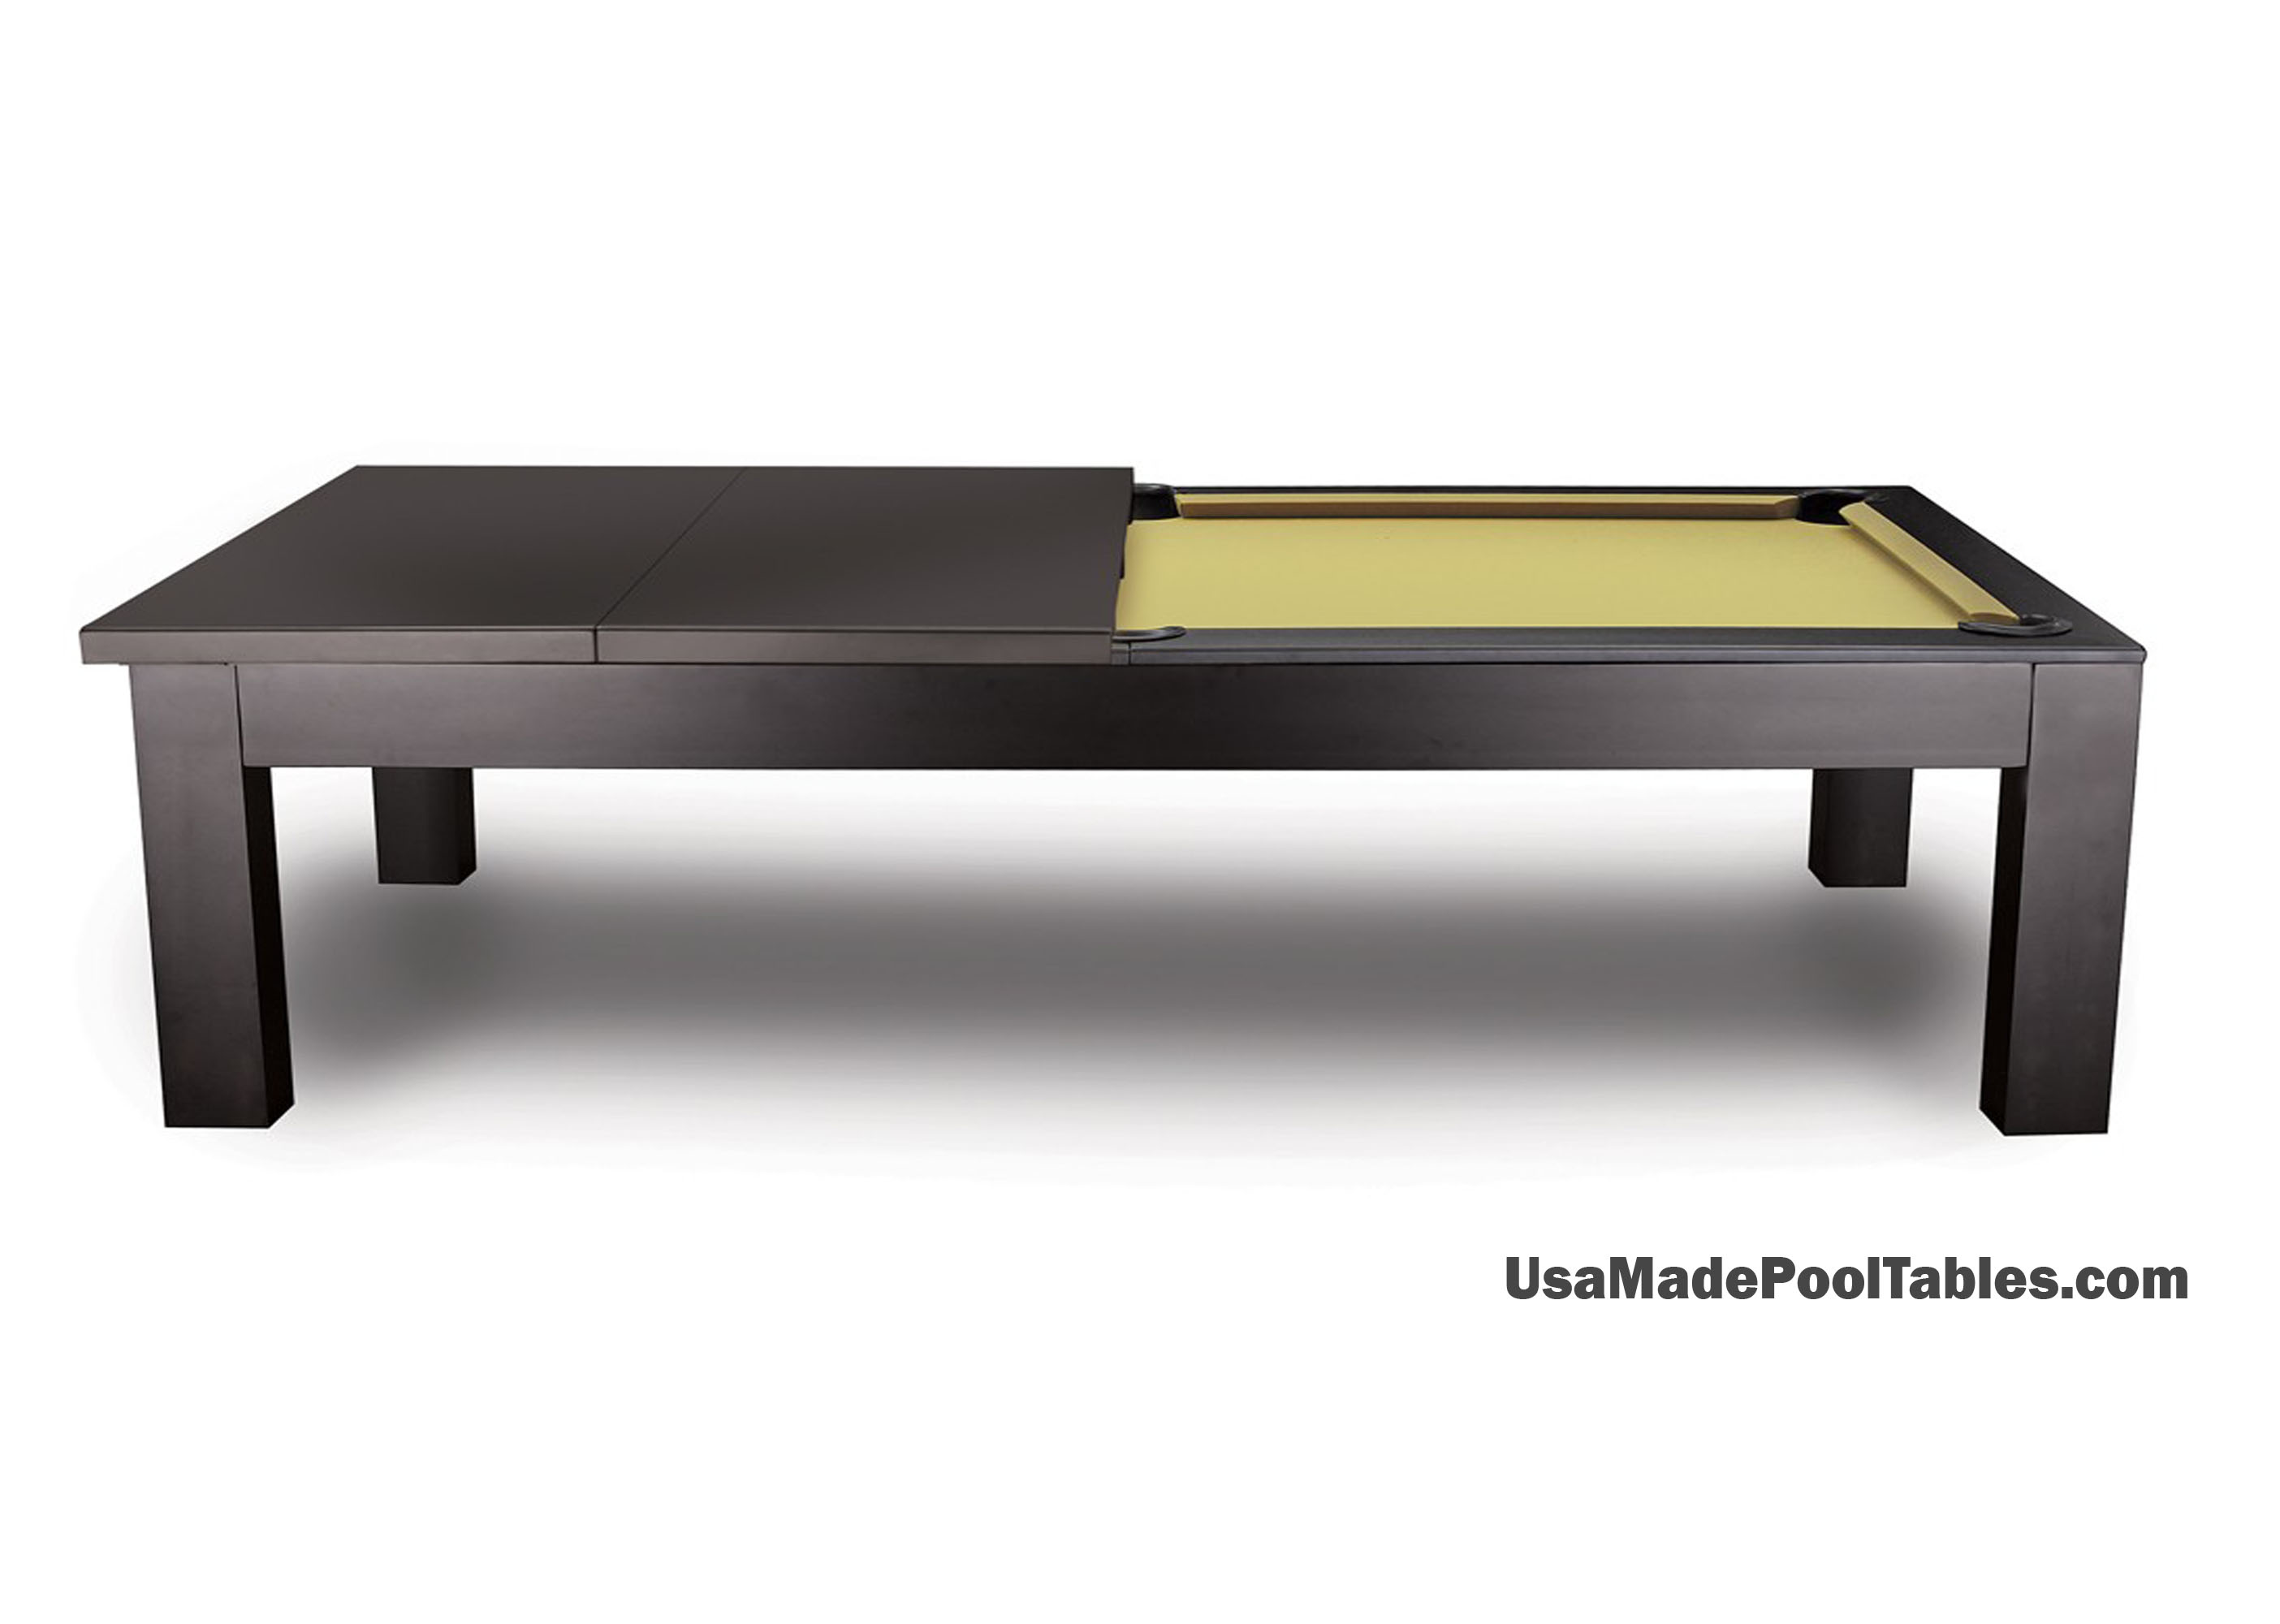 Nantucket Dining Pool Tables